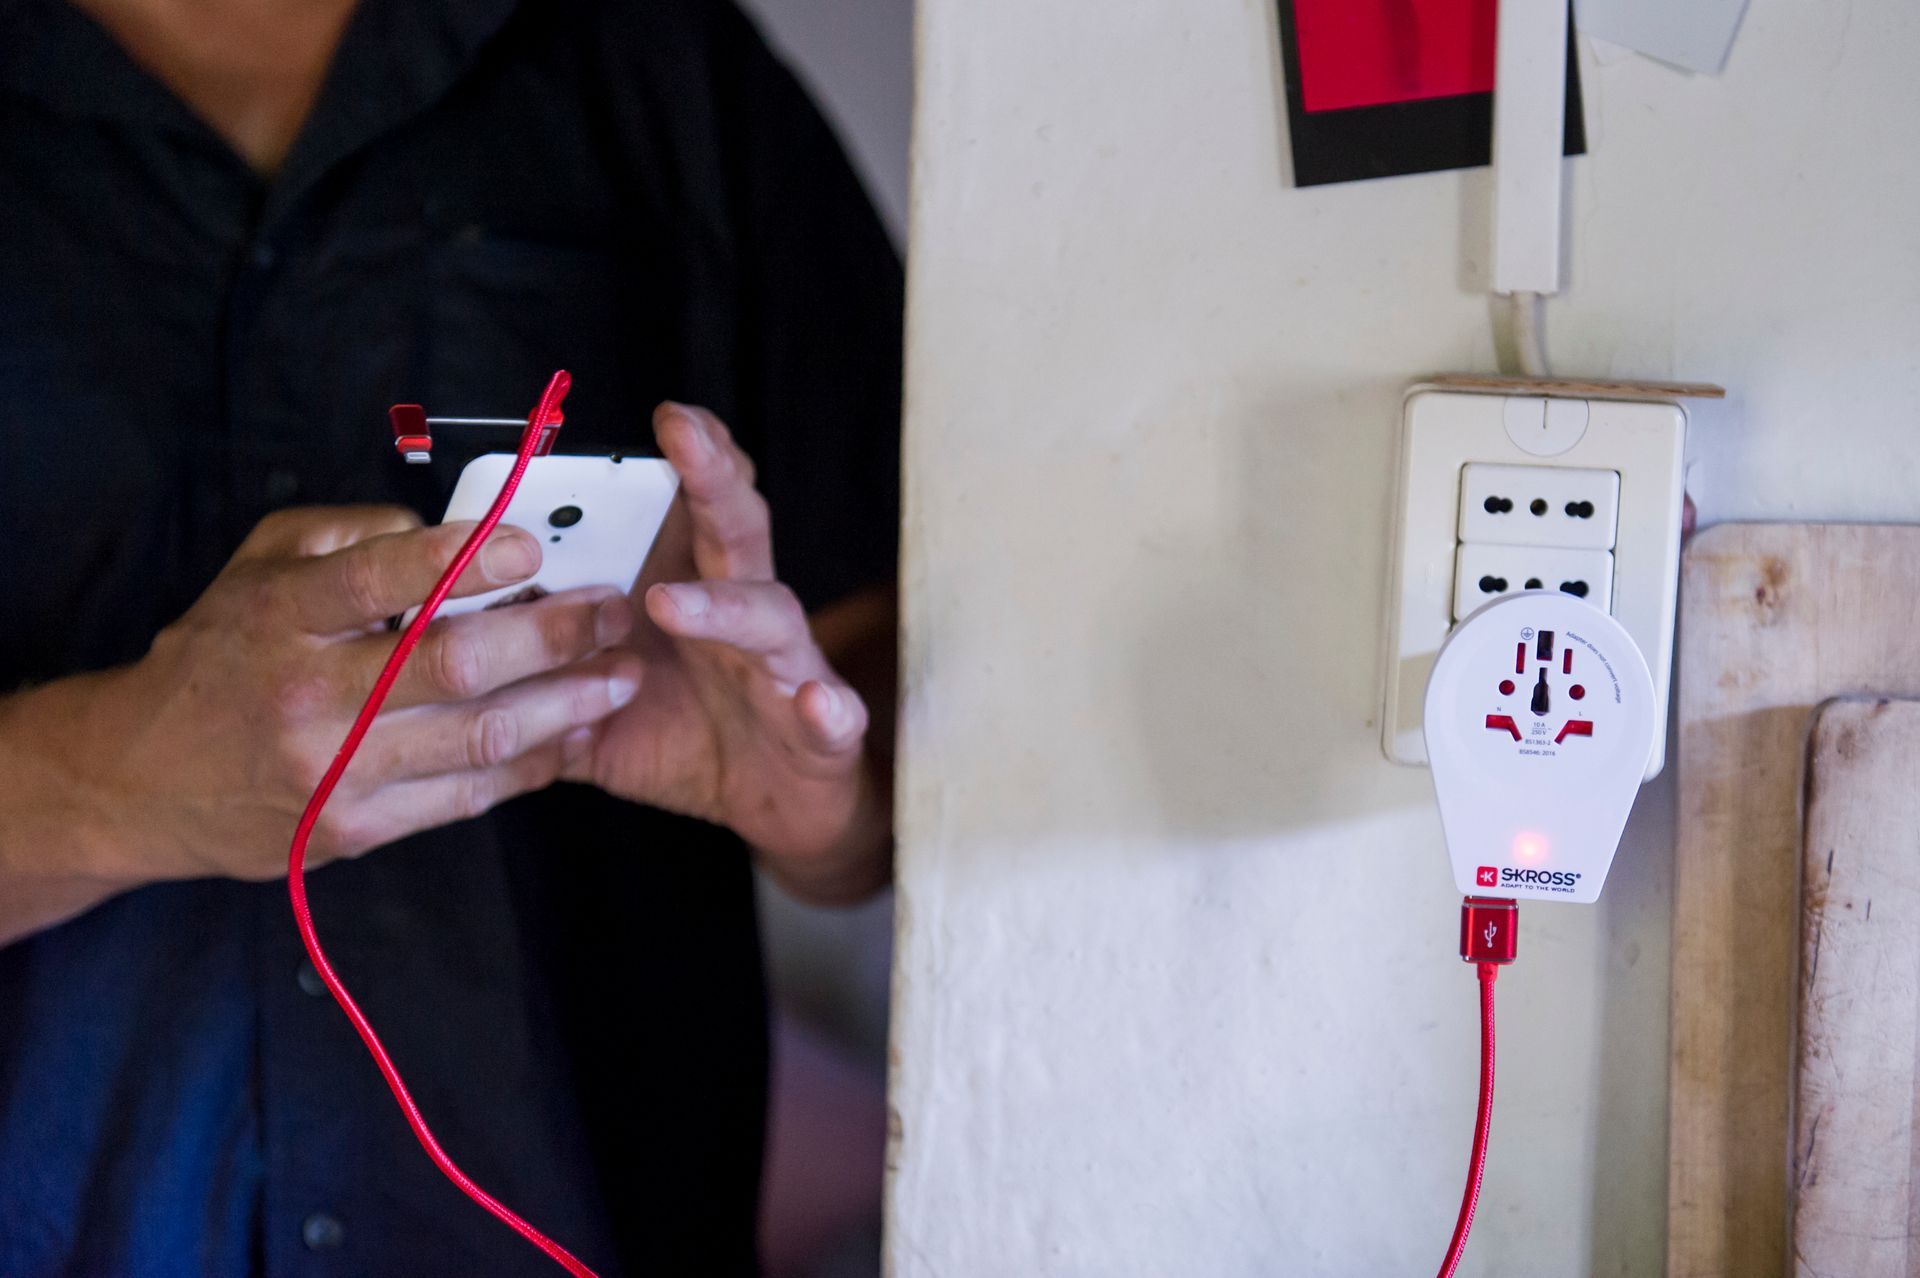 a person plugging a phone into a swiss Skross USB charger